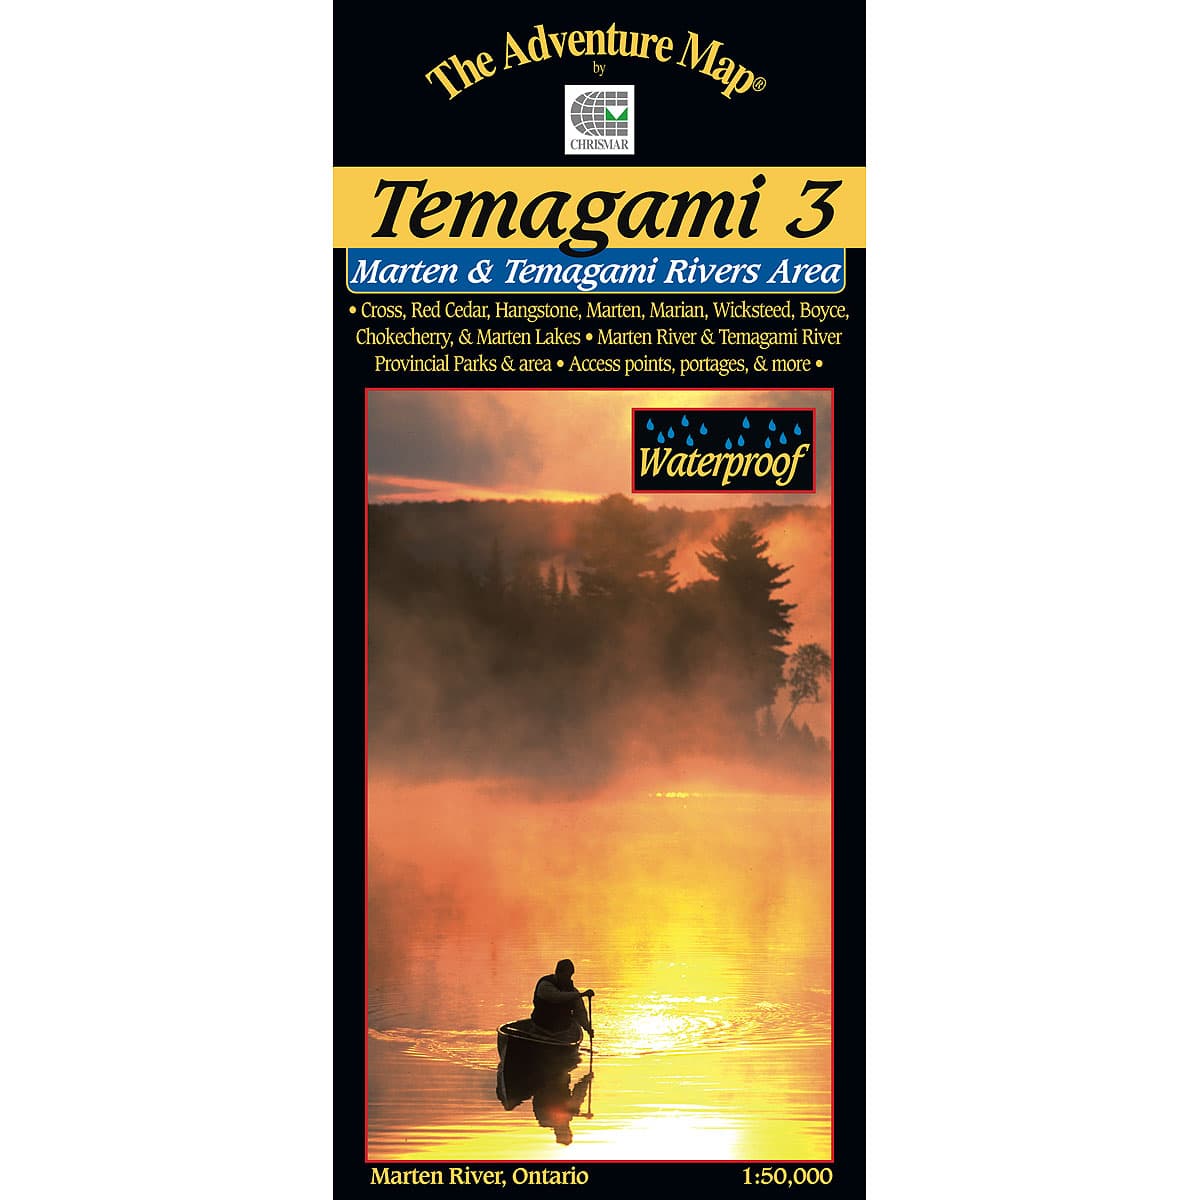 The Adventure Map Temagami 3 Marten River & Temagami River Area